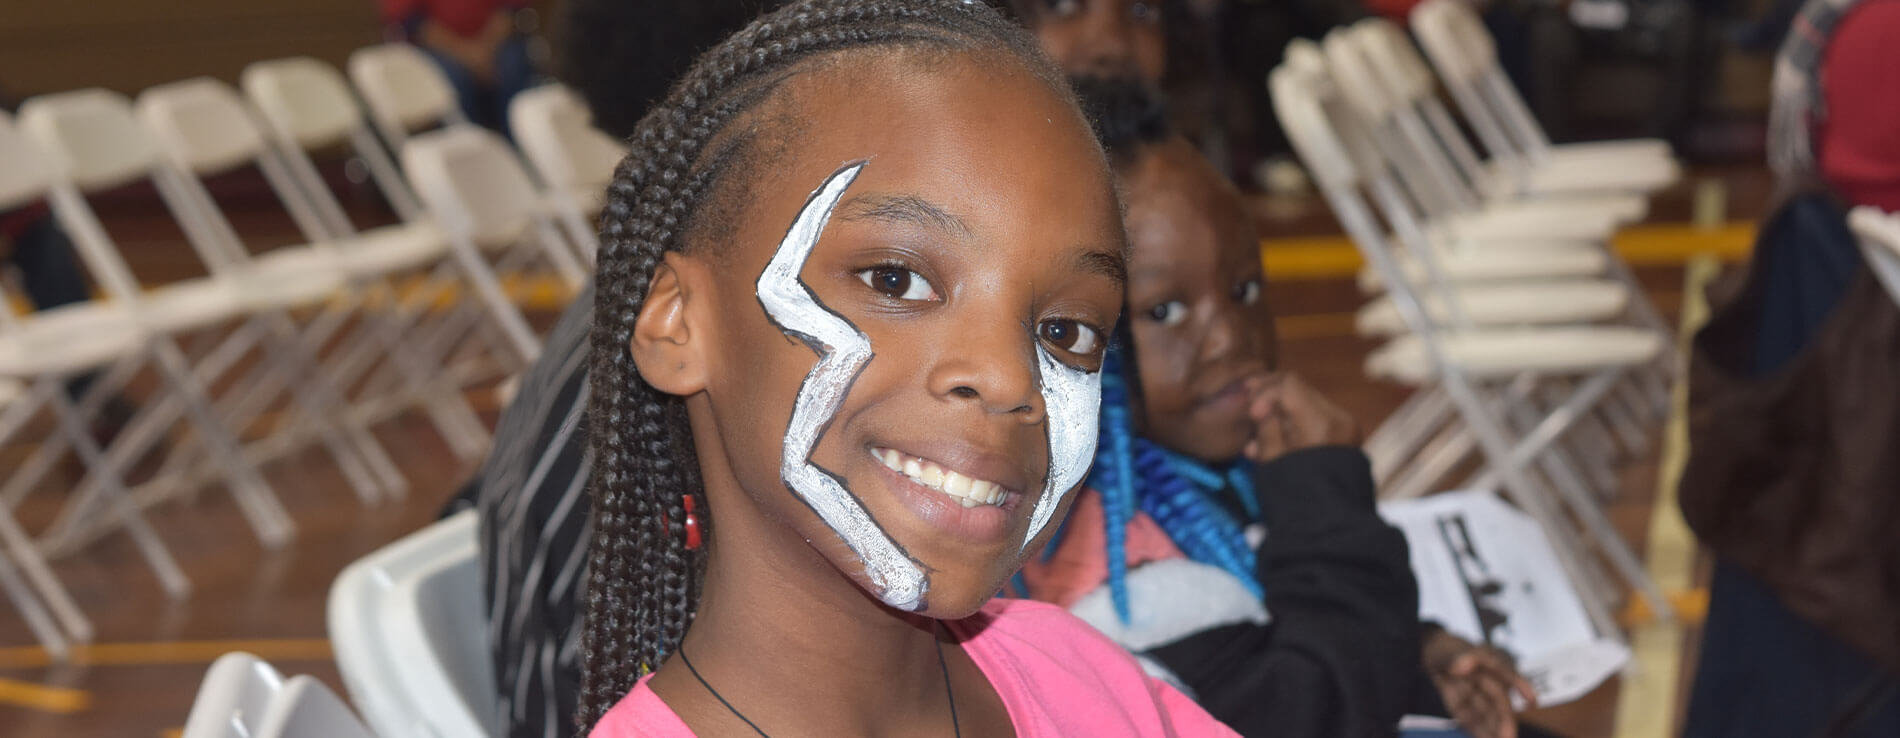 A child smiling while showing off her face paint.